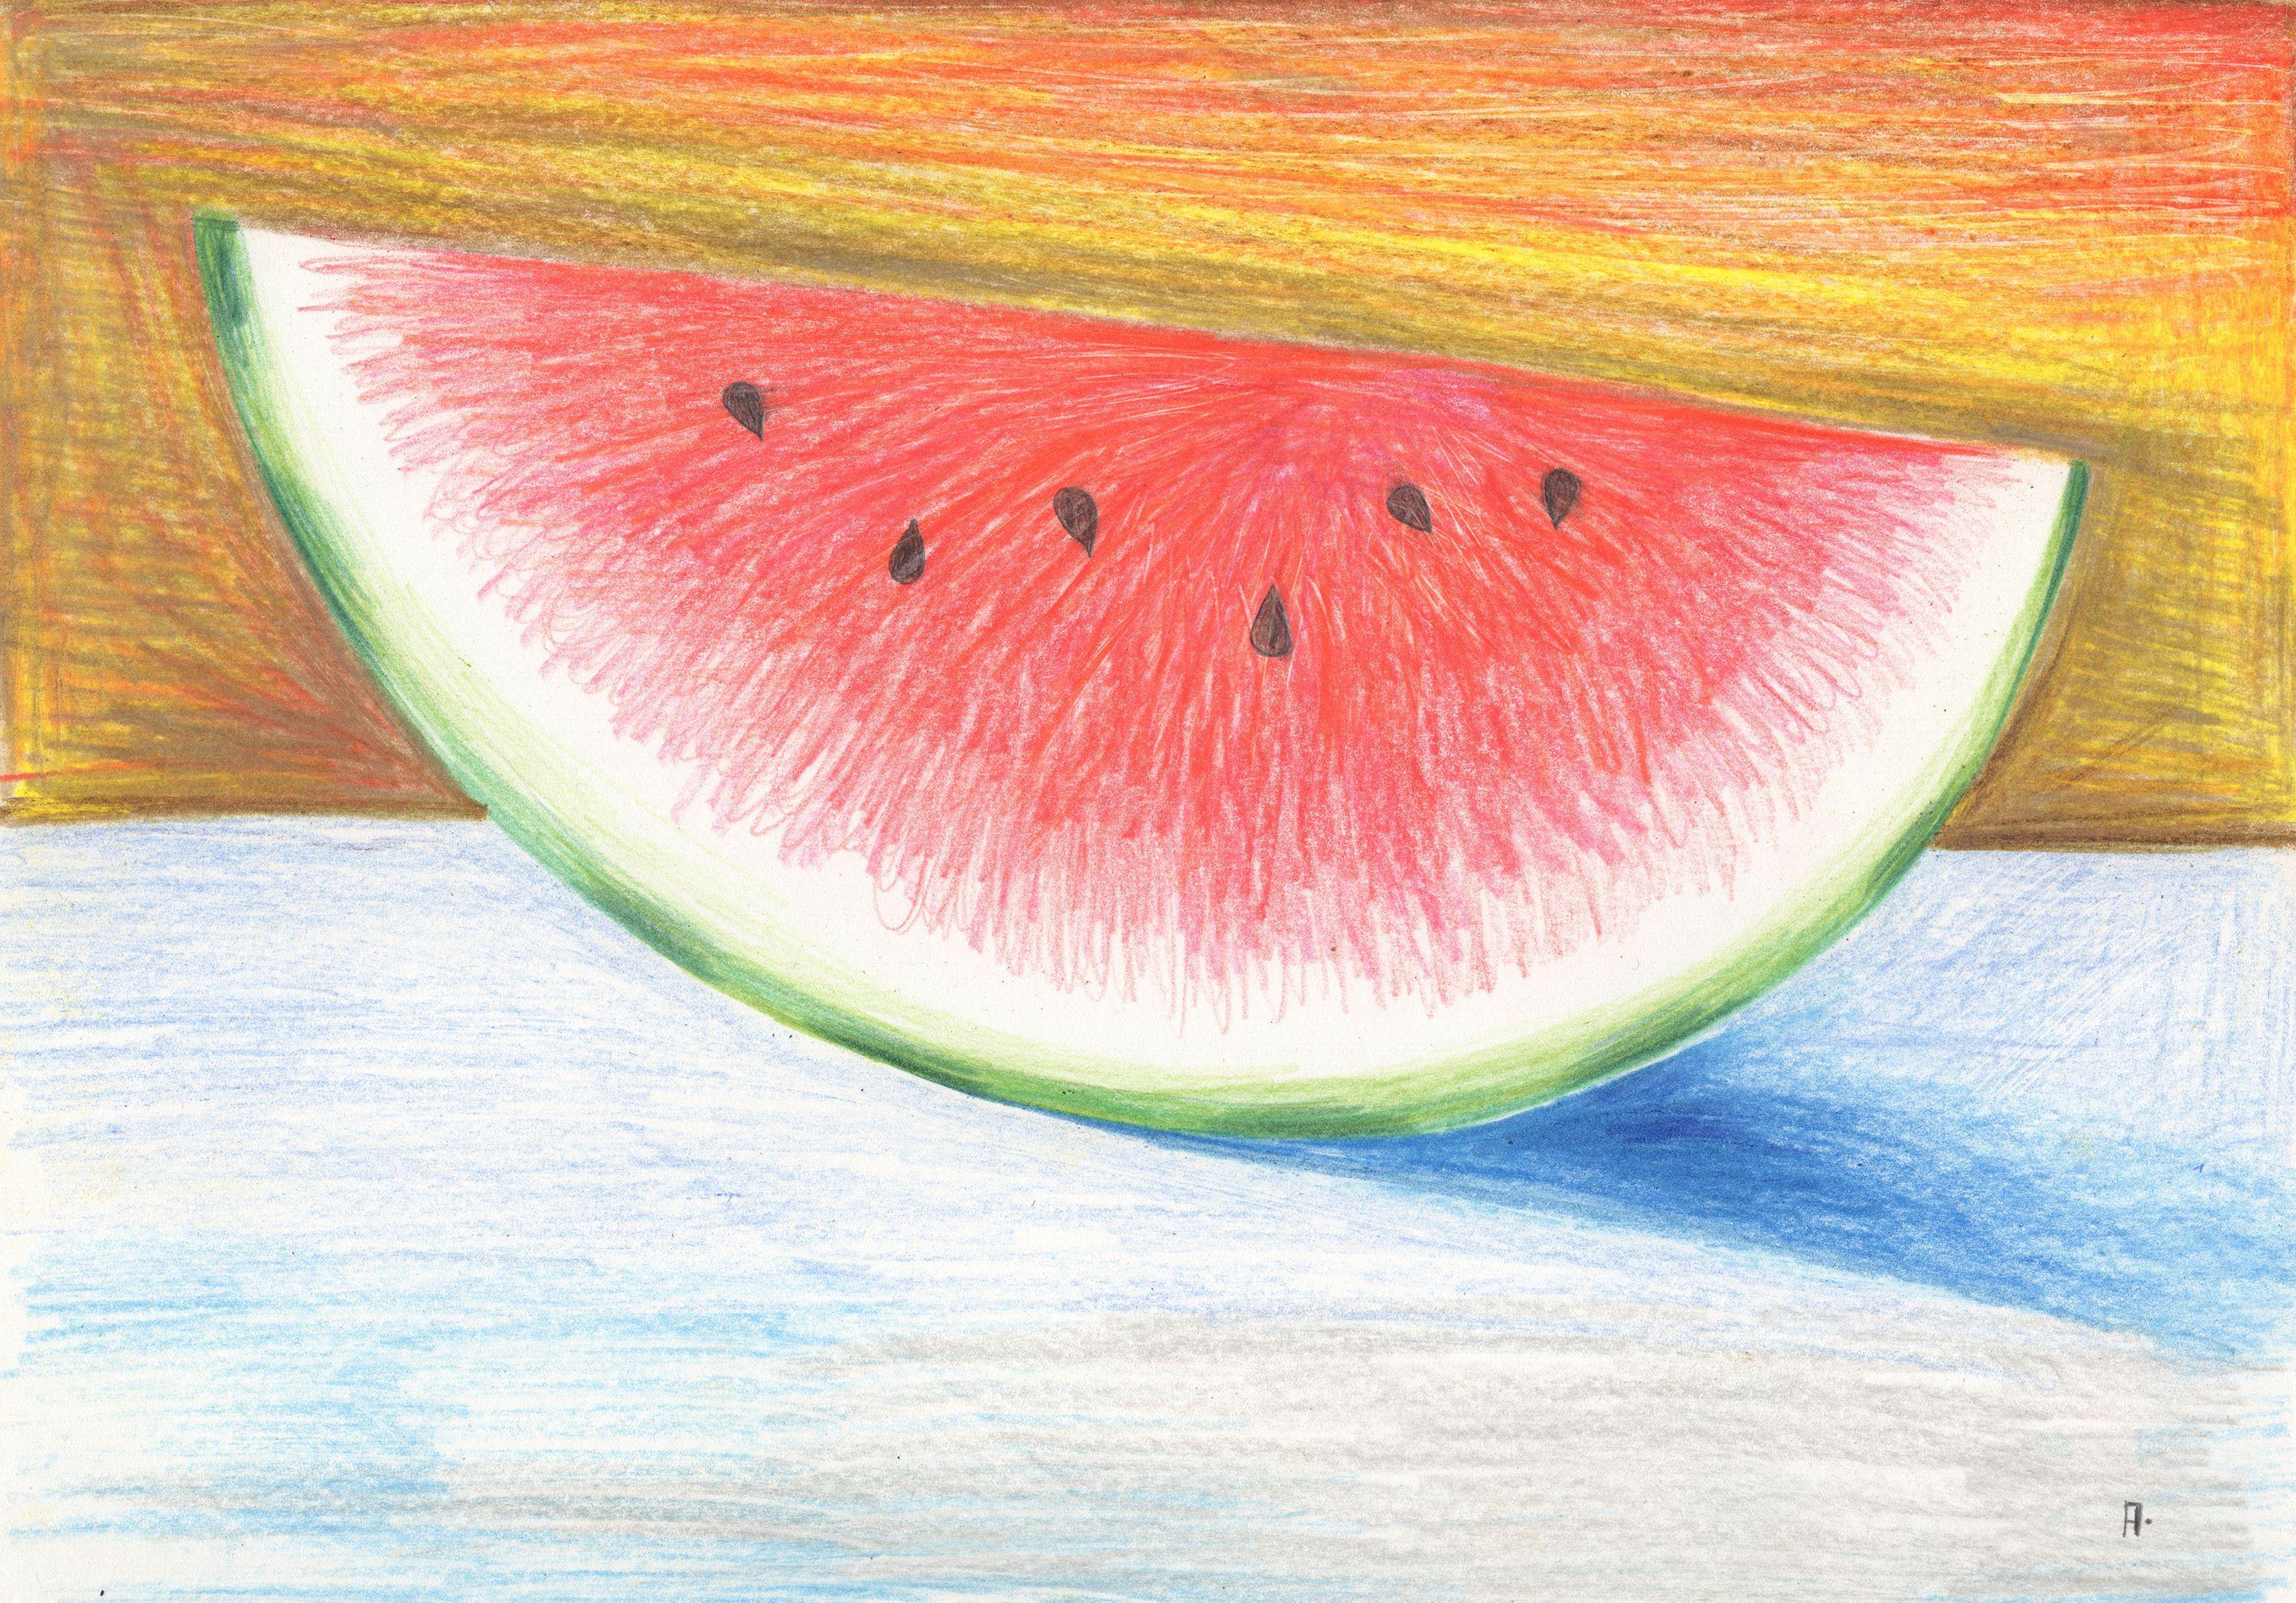 Watermelon Drawing, Drawing, Pencil/Colored Pencil on Paper - Art by Anton Maliar